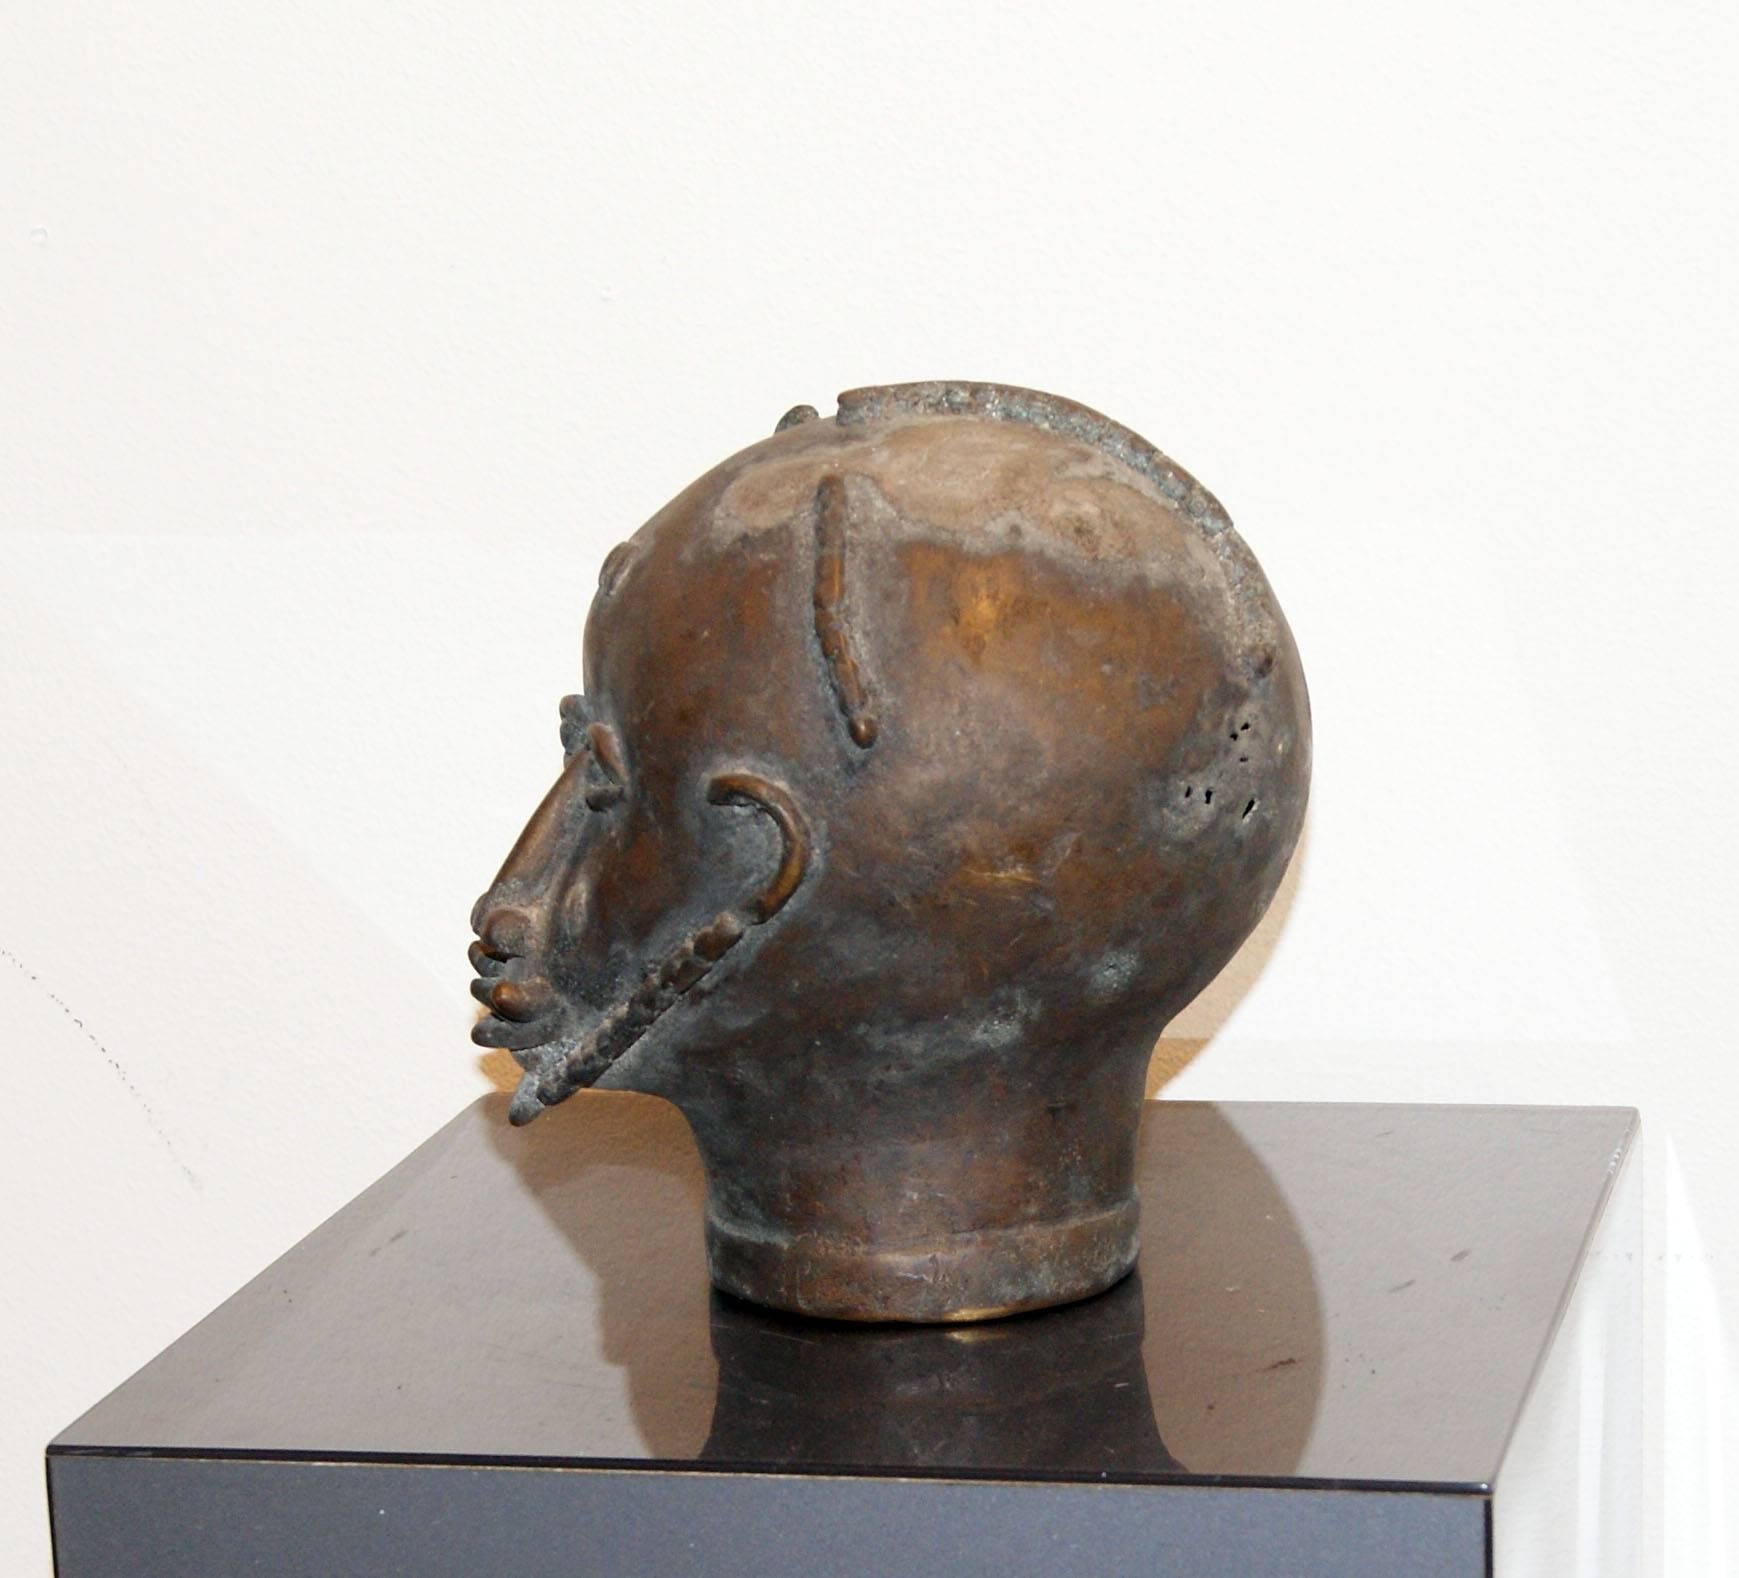 This is a very old bronze sculpture of a head from the Asante tribe in Africa.

